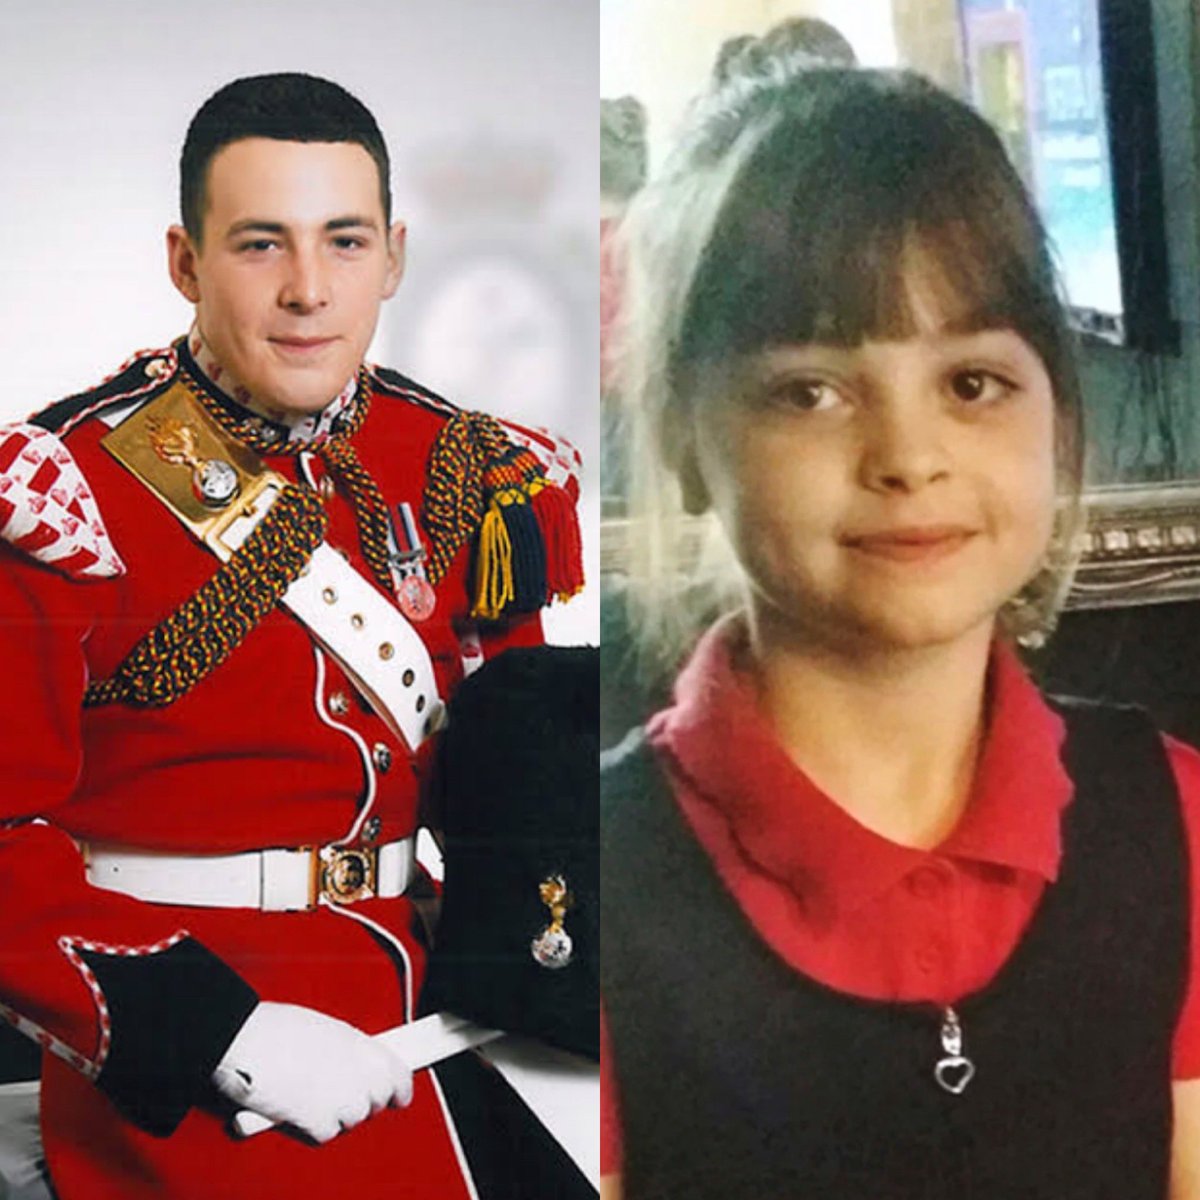 Never forget #leerigby #manchesterbombing